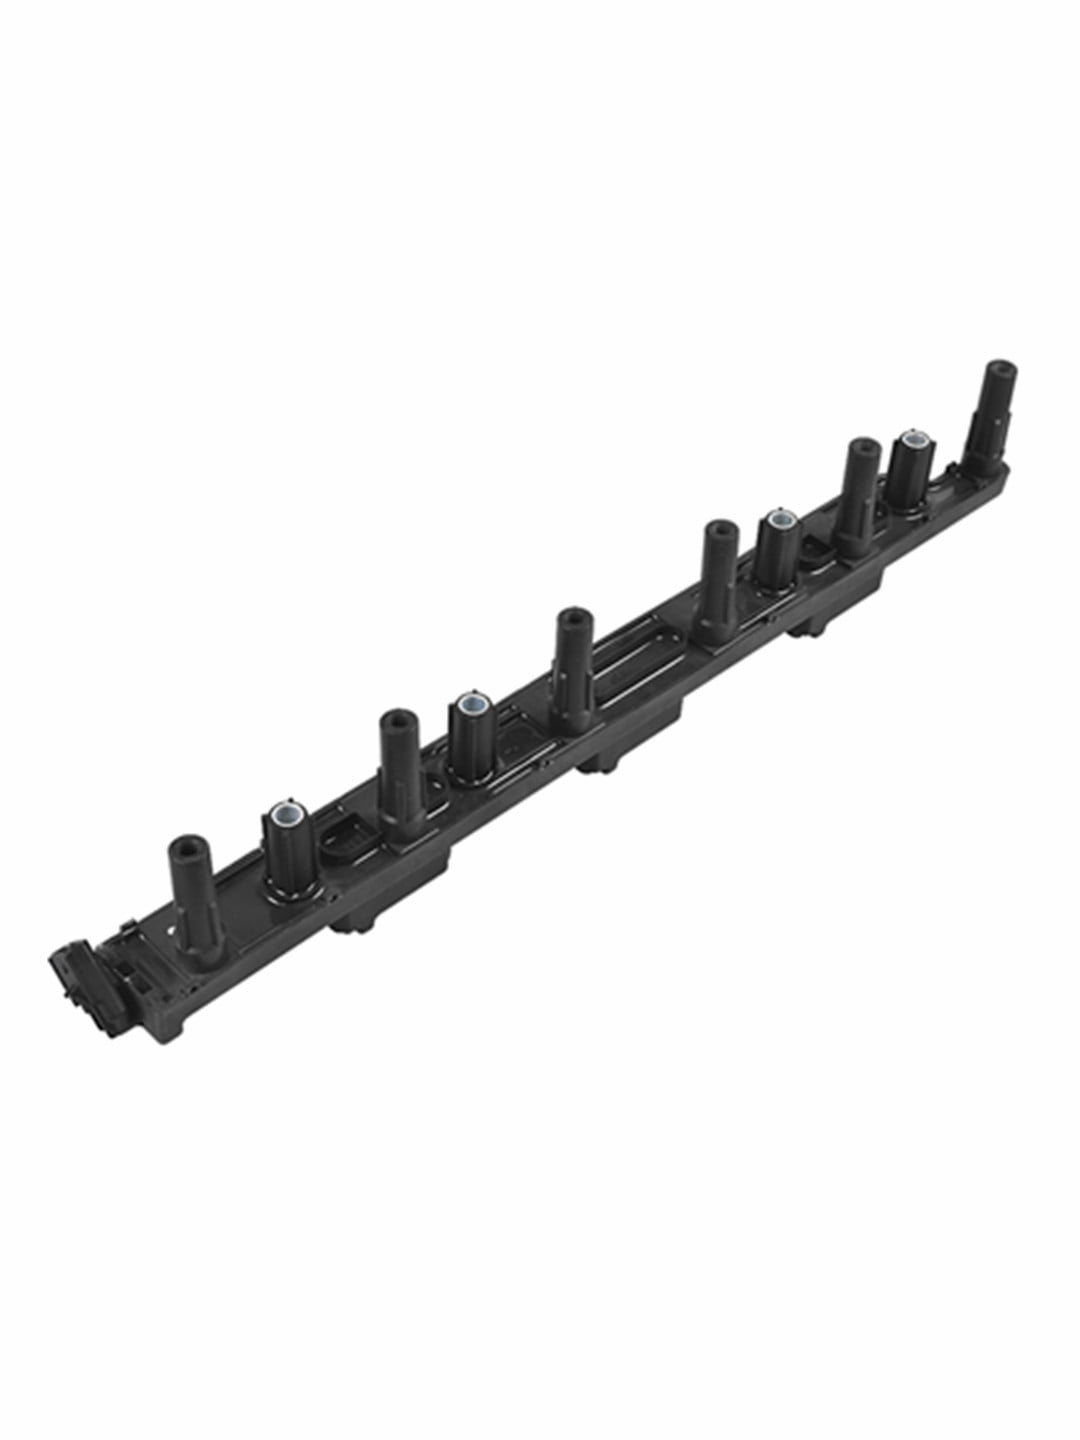 Ignition Coil Compatible with 2003-2006 Jeep Wrangler  L6 3956cc 241ci  Replacement for UF296 